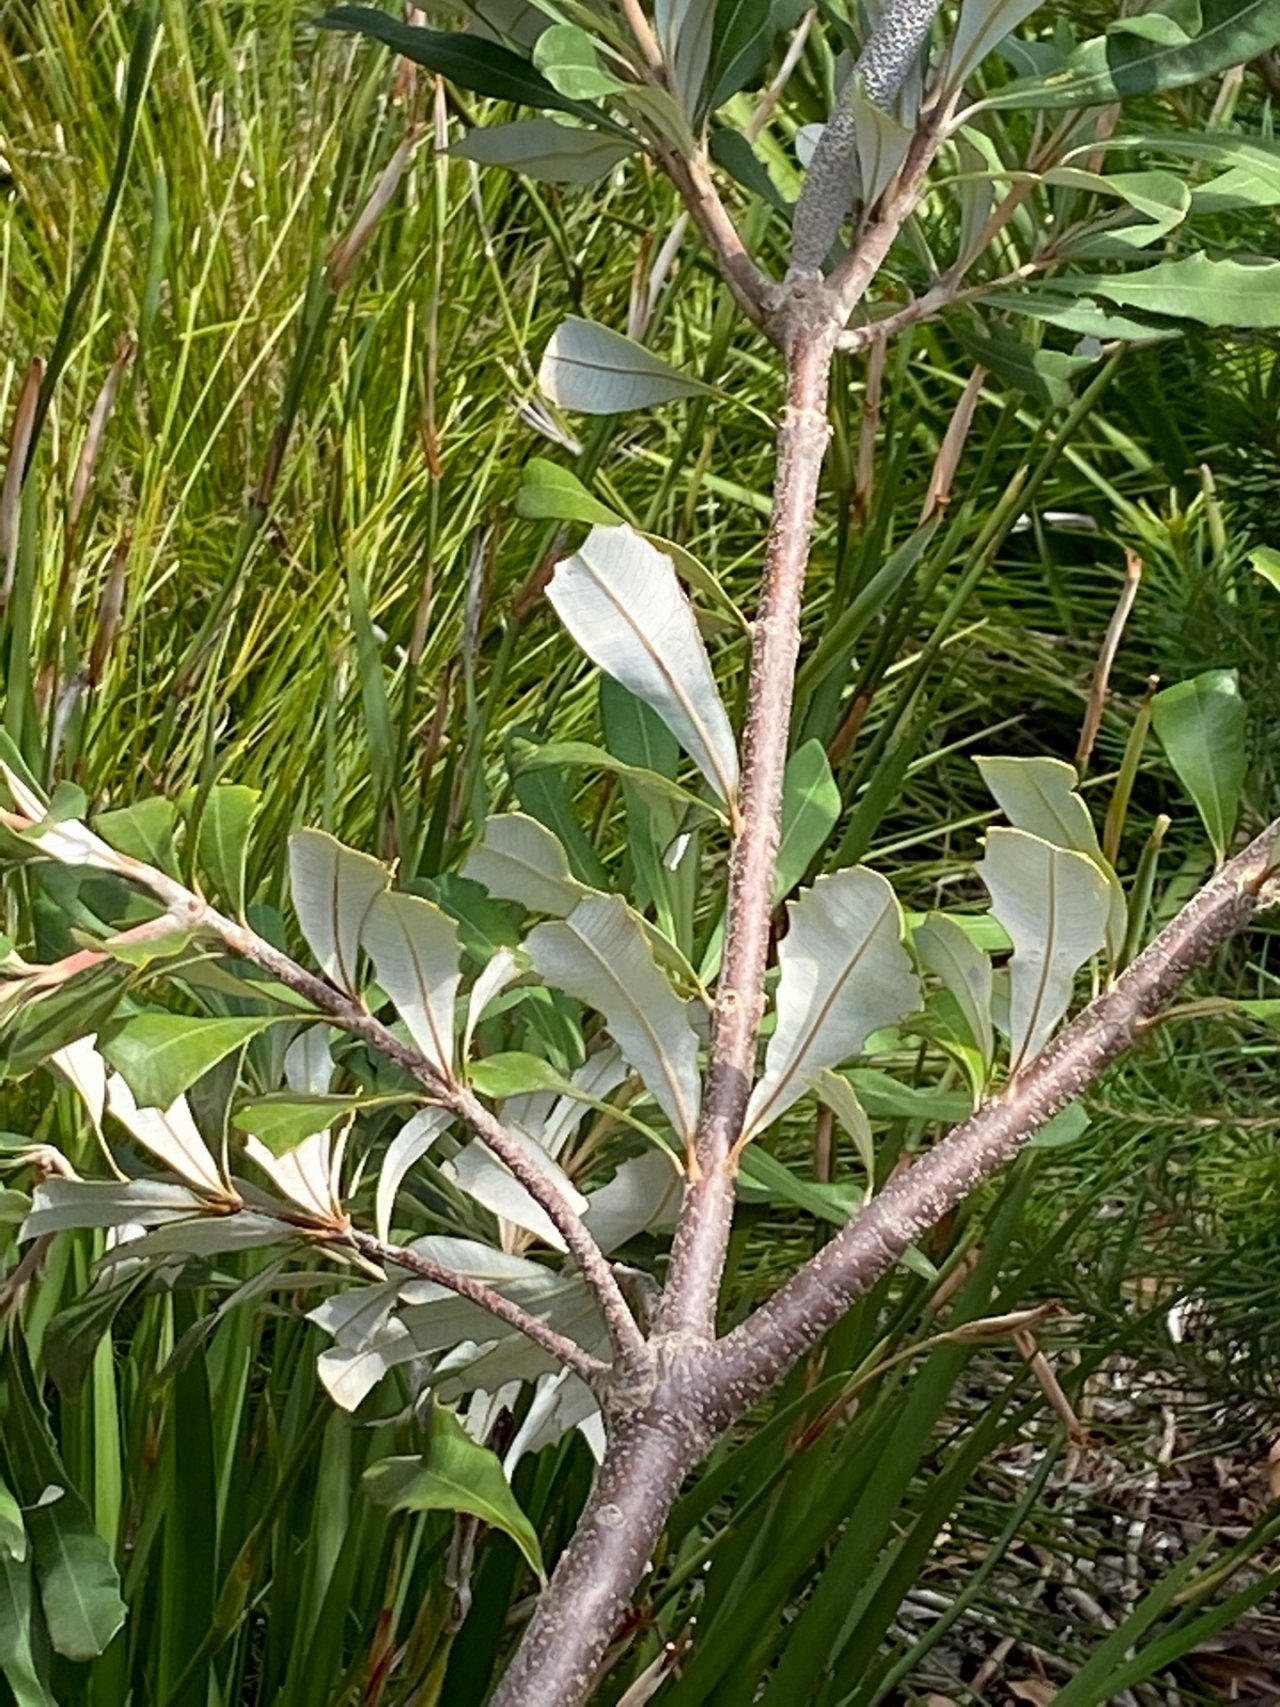 Silver Banksia in ClimateWatch App spotted by Finn Russell on 25.02.2021